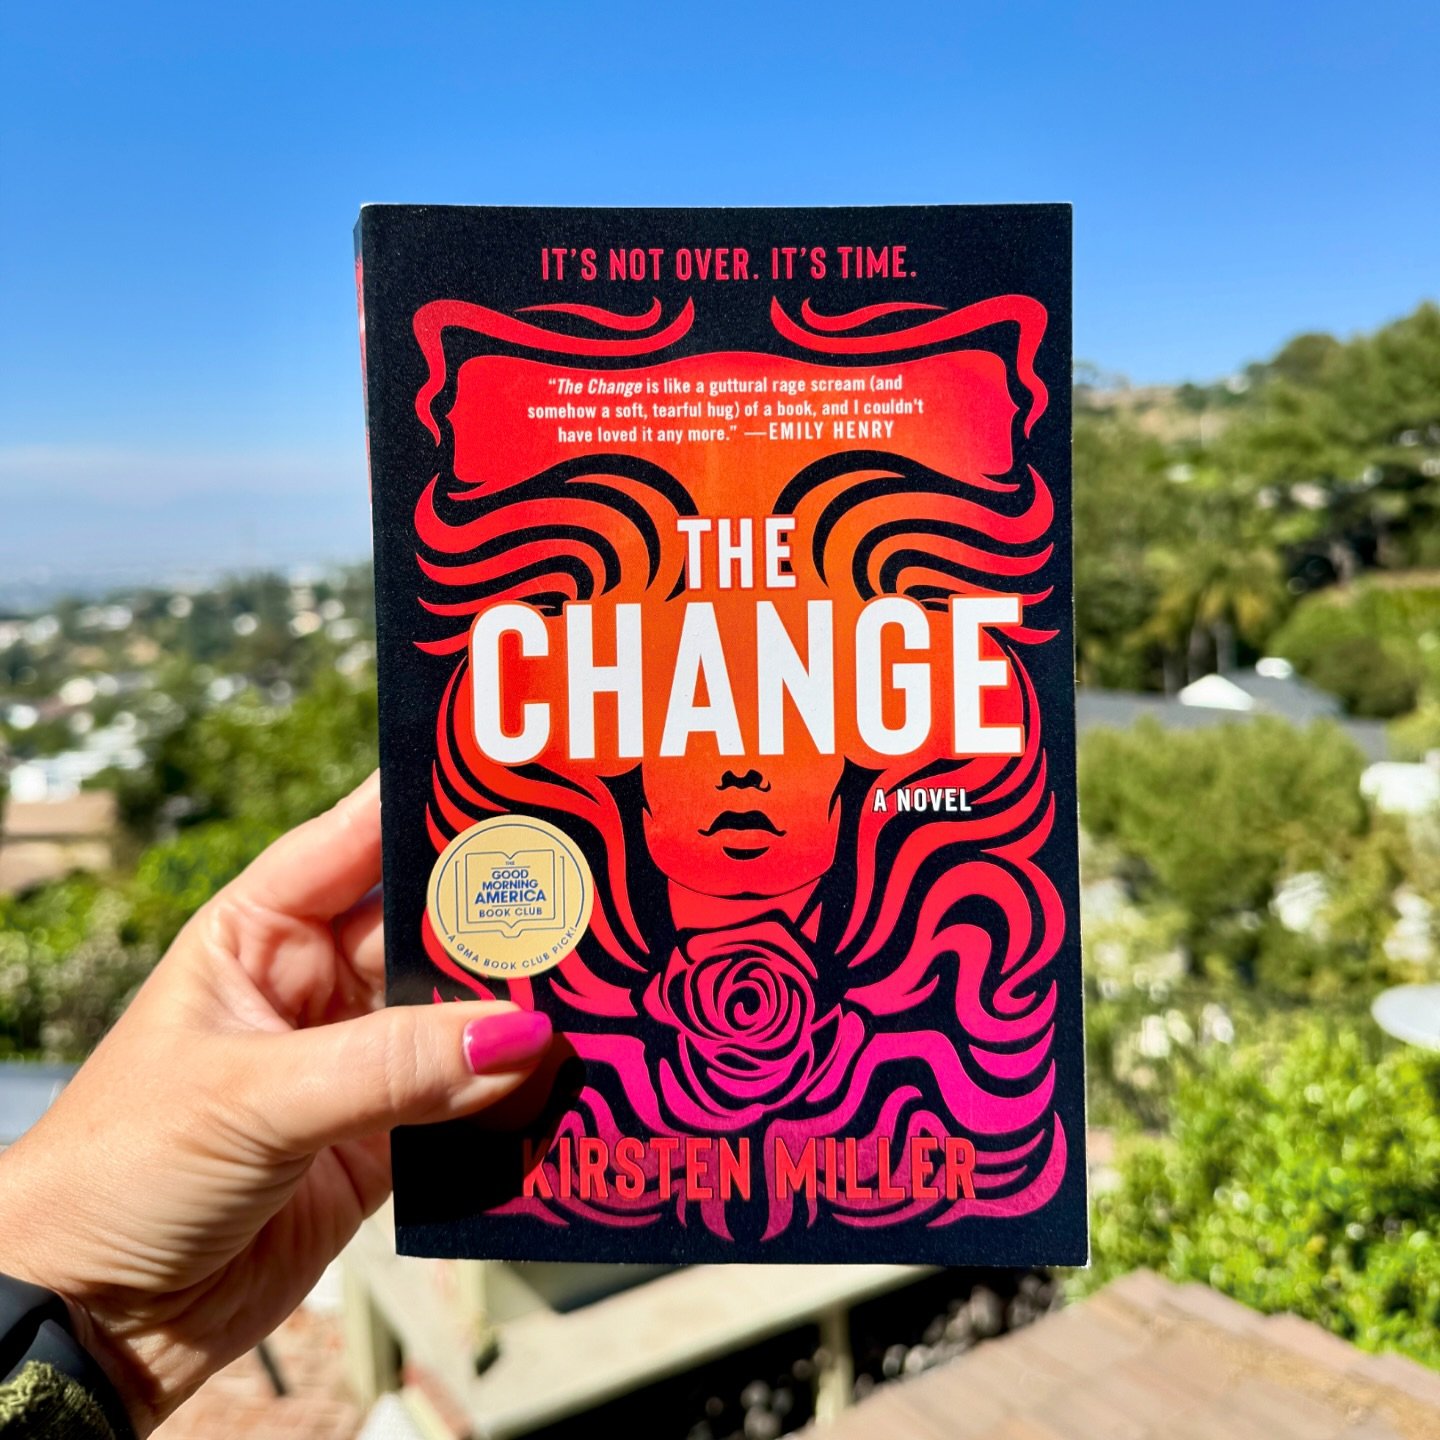 Finishing up THE CHANGE by Kirsten Miller today so we can discuss it in Secret Stuff Book Club tonight. (Yes I&rsquo;m sort of sneaking in under the wire on this one!) 

Based on the posts I&rsquo;m seeing from Secret Stuff Book Club members, this is